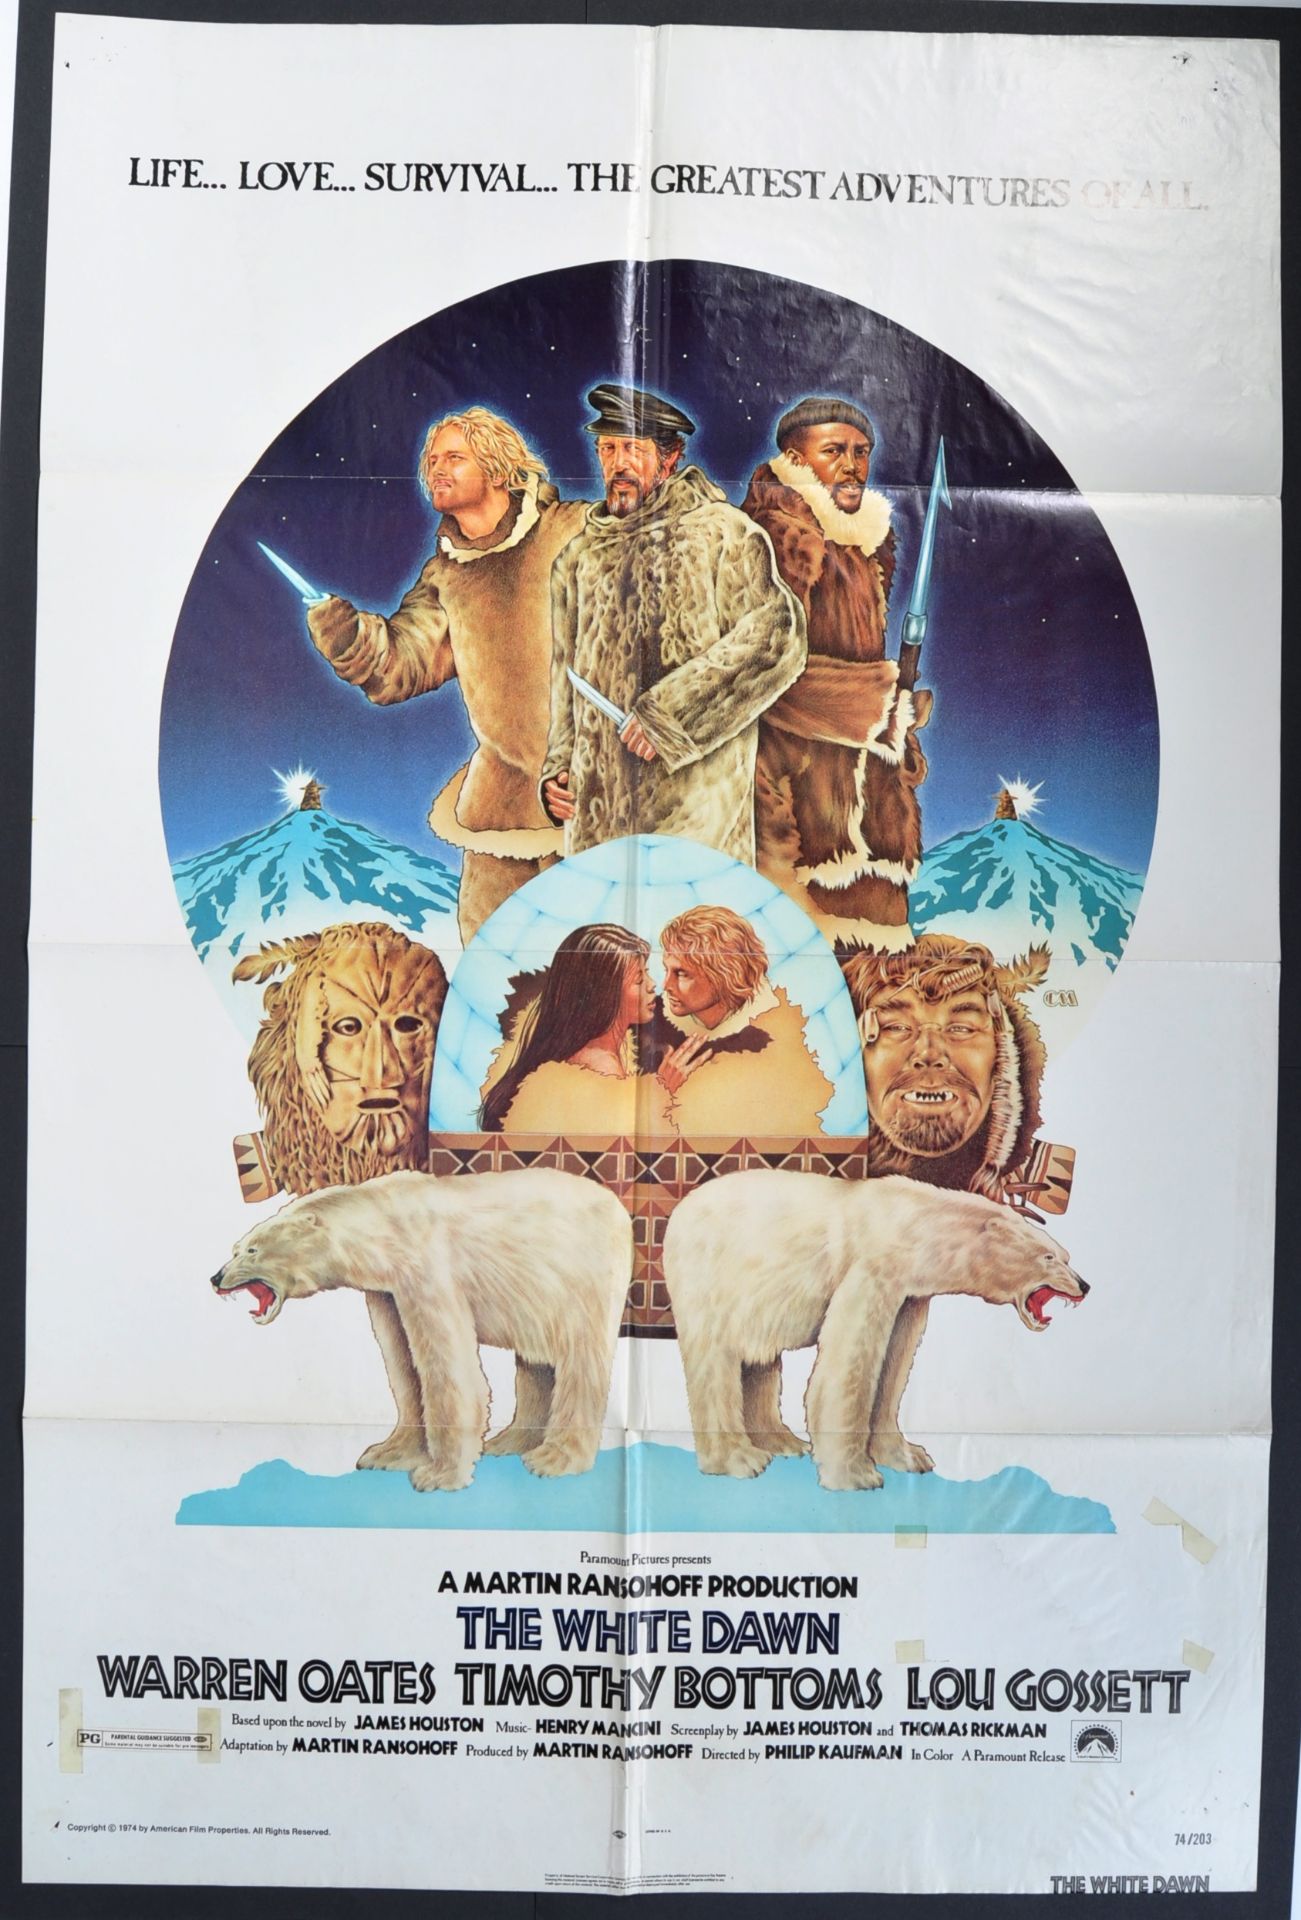 COLLECTION OF ASSORTED VINTAGE MOVIE CINEMA POSTERS - Image 2 of 5